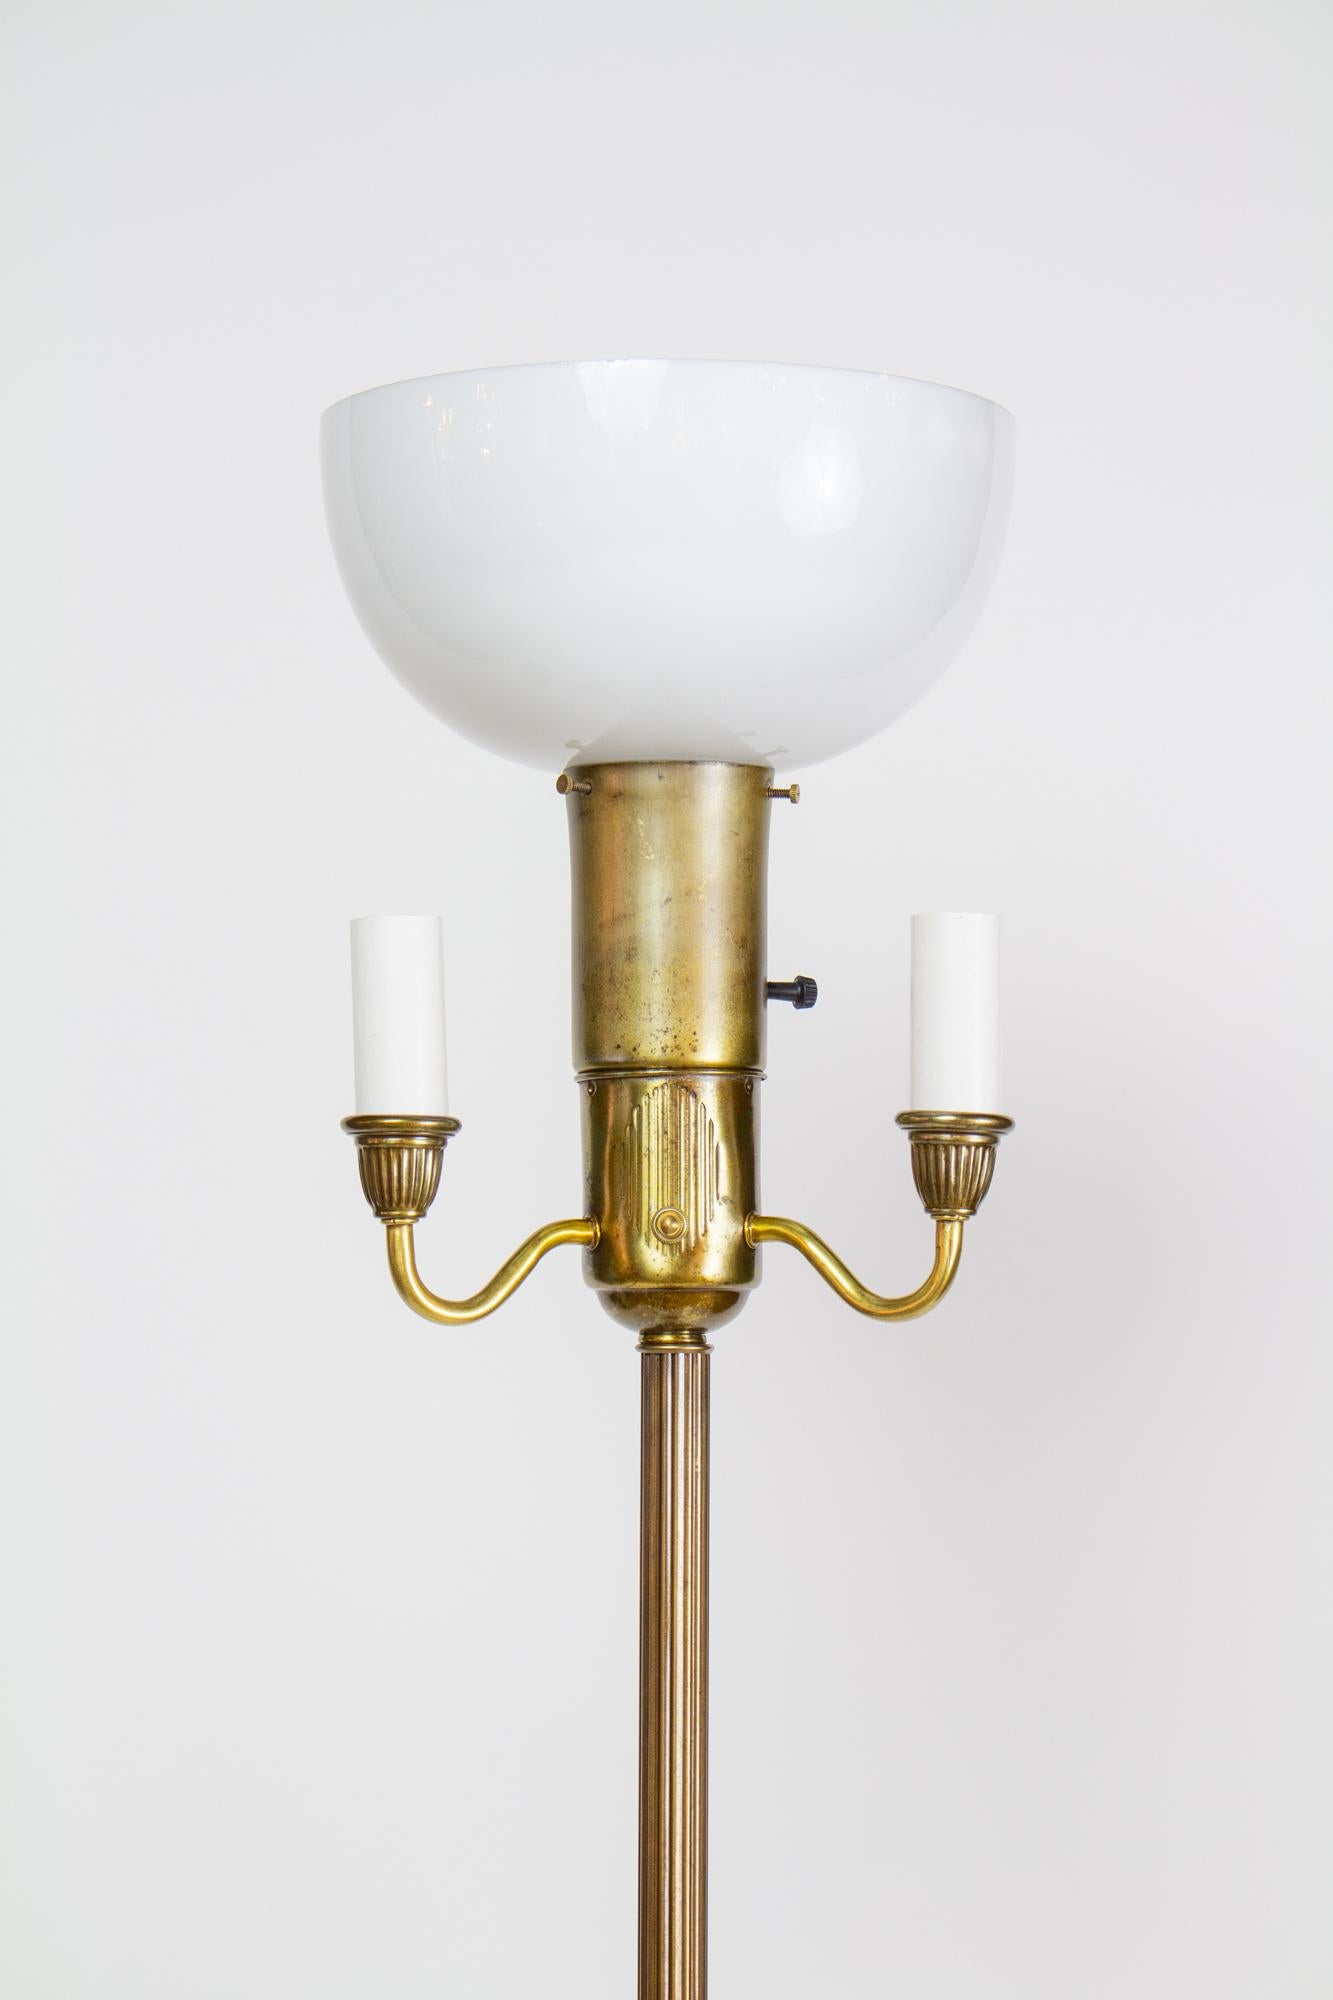 Six way floor lamp, simple and traditional. Combination of brass and brass plated parts. Mogul base socket at top, with a milk glass diffuser shade for a high level of diffuse light. Three standard base candle sockets around the center for a variety